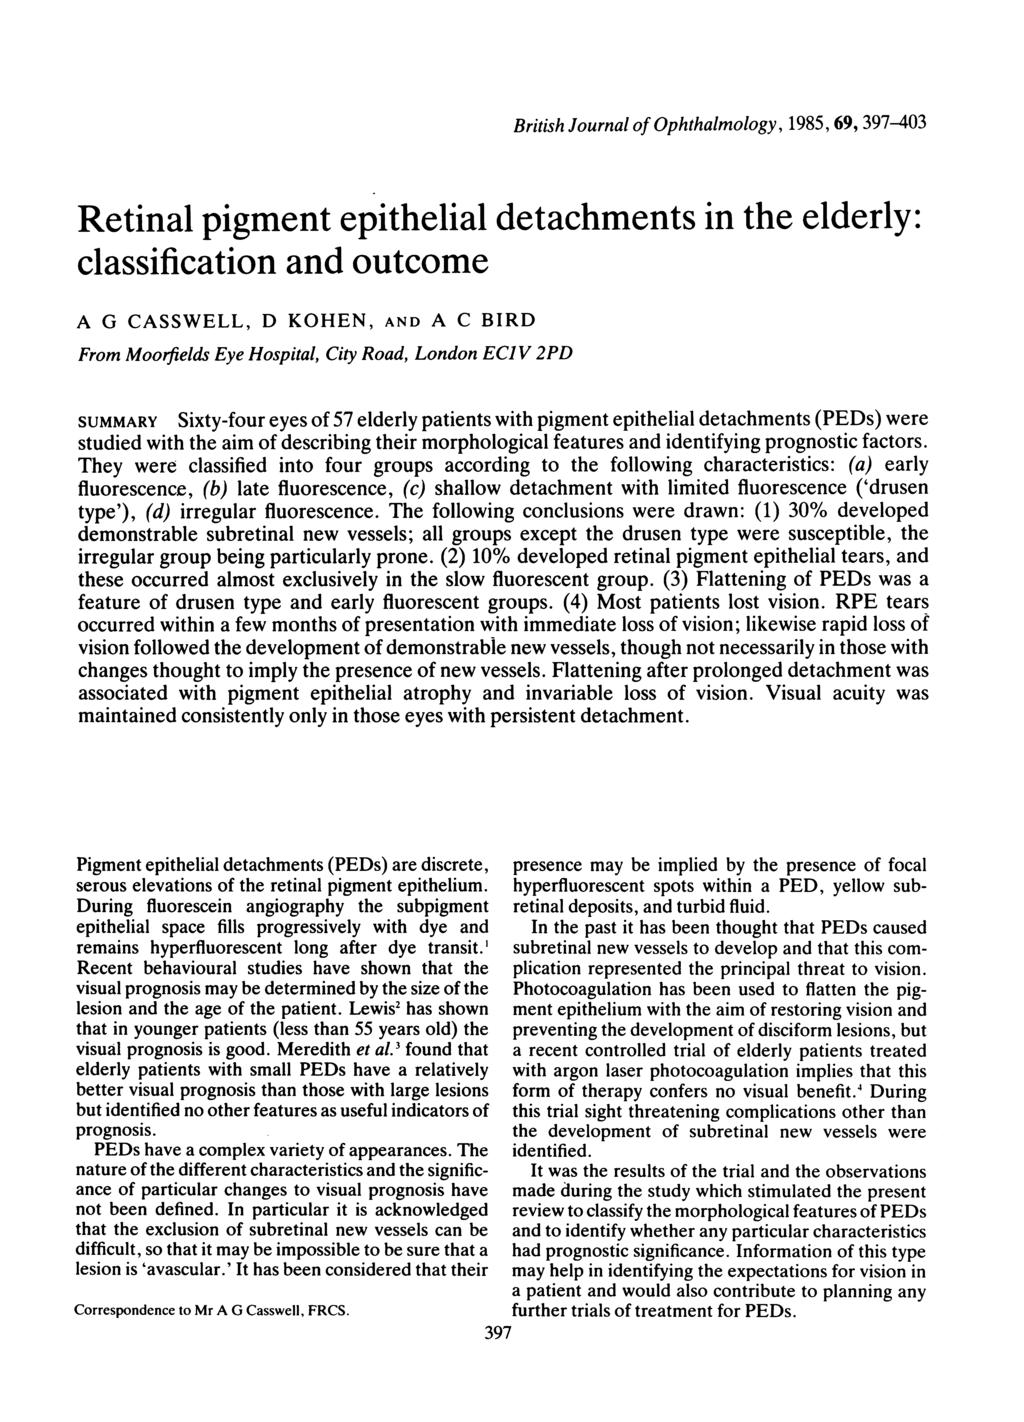 British Journal of Ophthalmology, 1985, 69, 397-403 Retinal pigment epithelial detachments in the elderly: classification and outcome A G CASSWELL, D KOHEN, AND A C BIRD From Moorfields Eye Hospital,